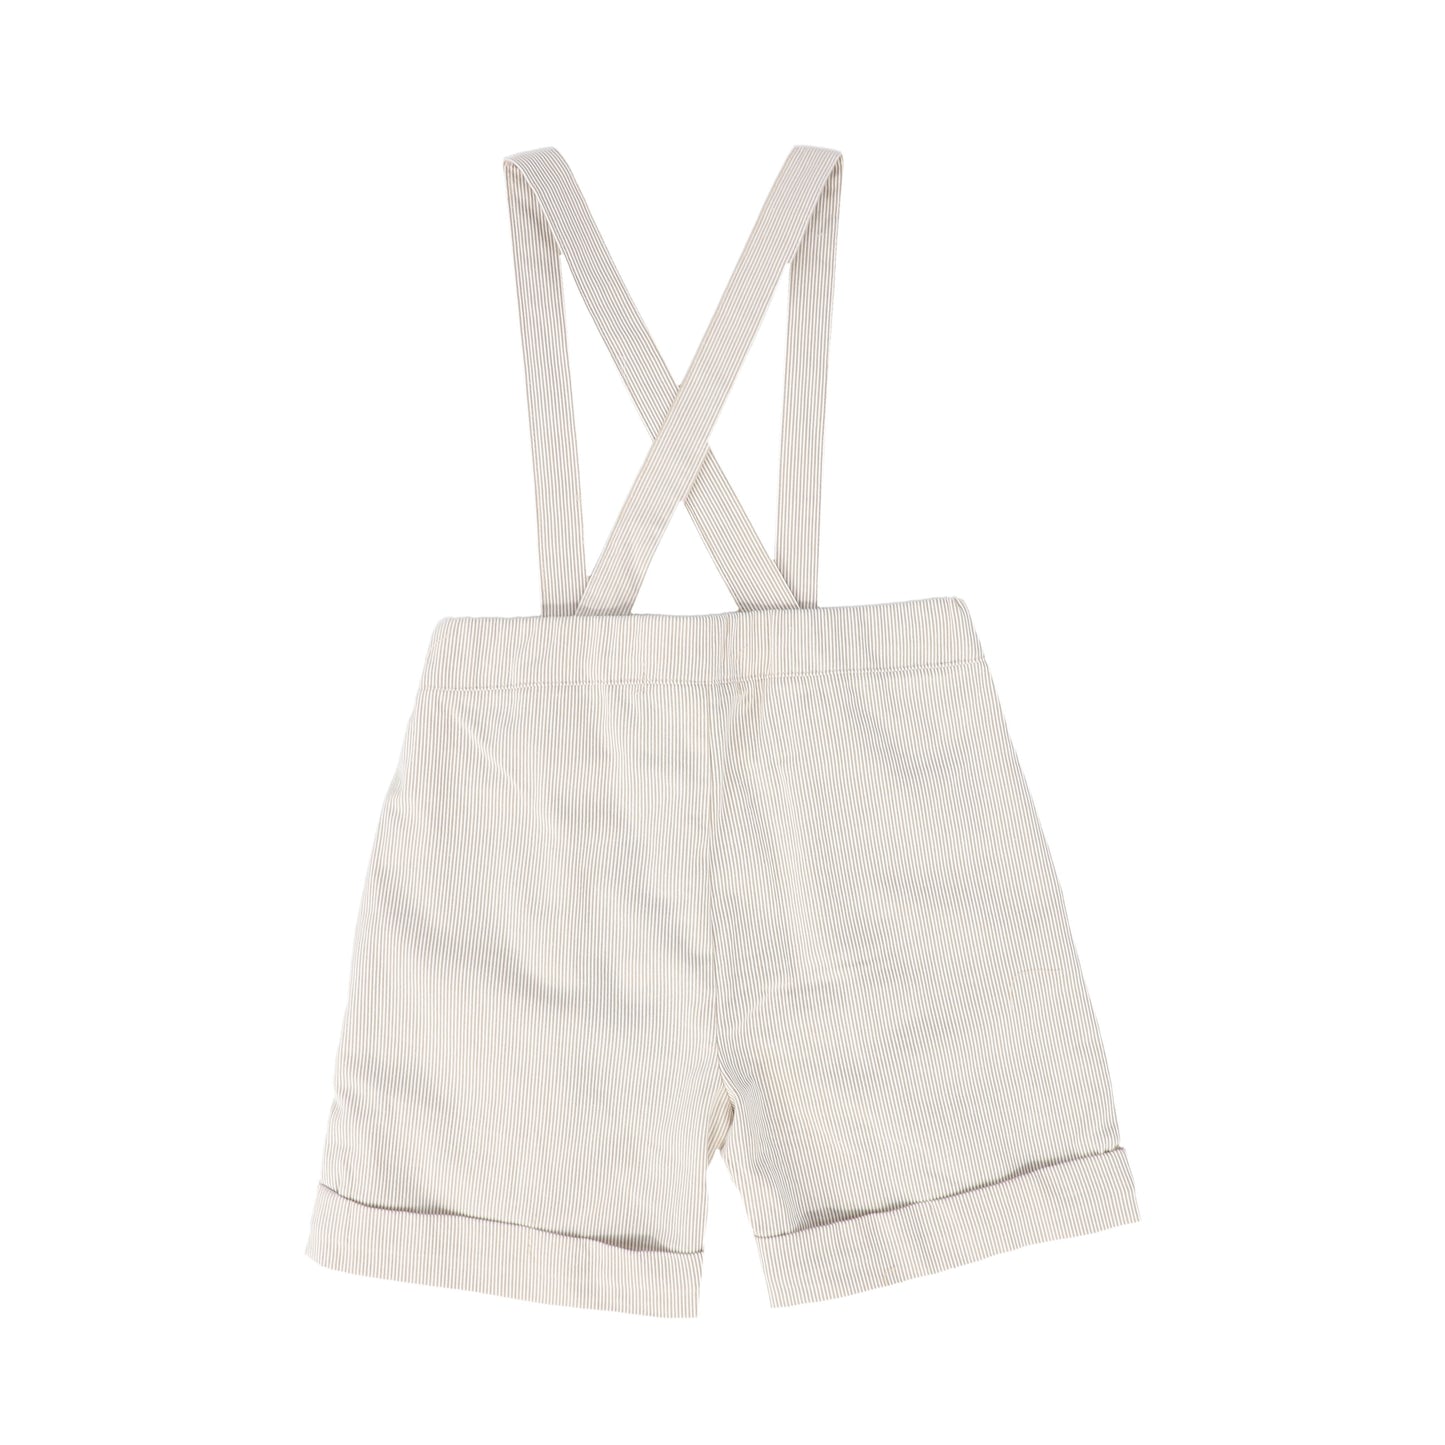 BACE COLLECTION TAN THIN STRIPED SUSPENDER SHORTS [FINAL SALE]